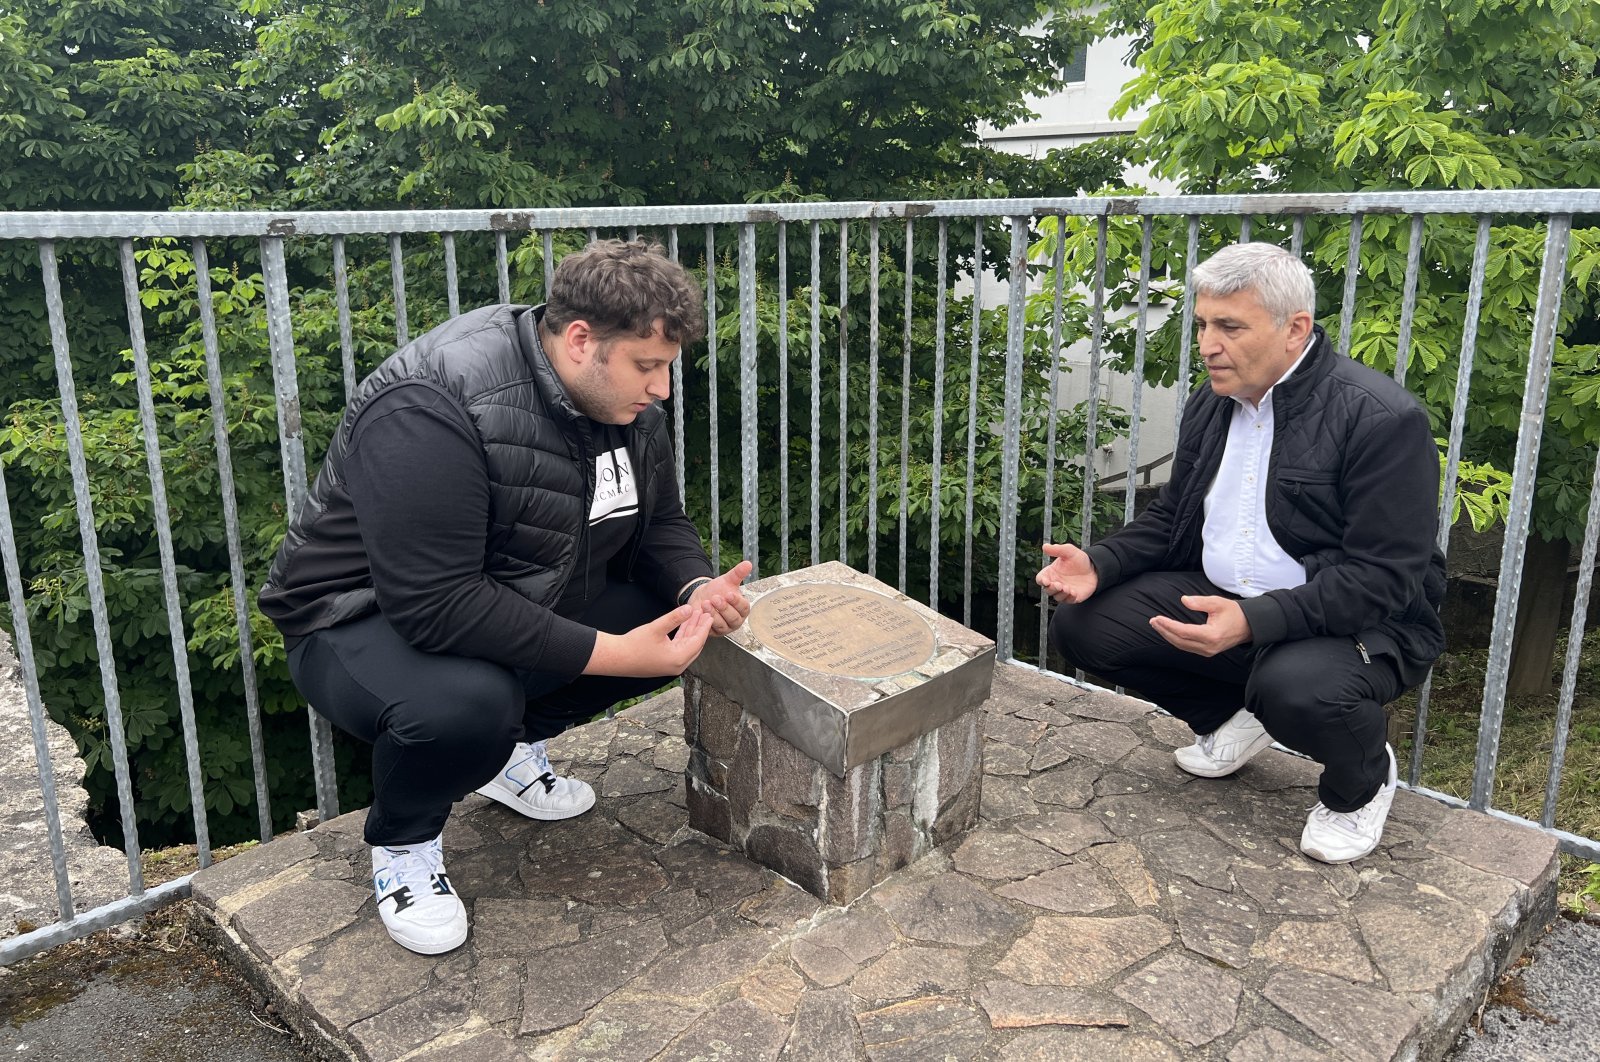 Kamil Genç (R) who lost his two daughters, two older sisters and niece in the racist attack on May 29, 1993, praying at a commemorative plaque dedicated to the victims, Solingen, Germany, May 29, 2022. (AA Photo)